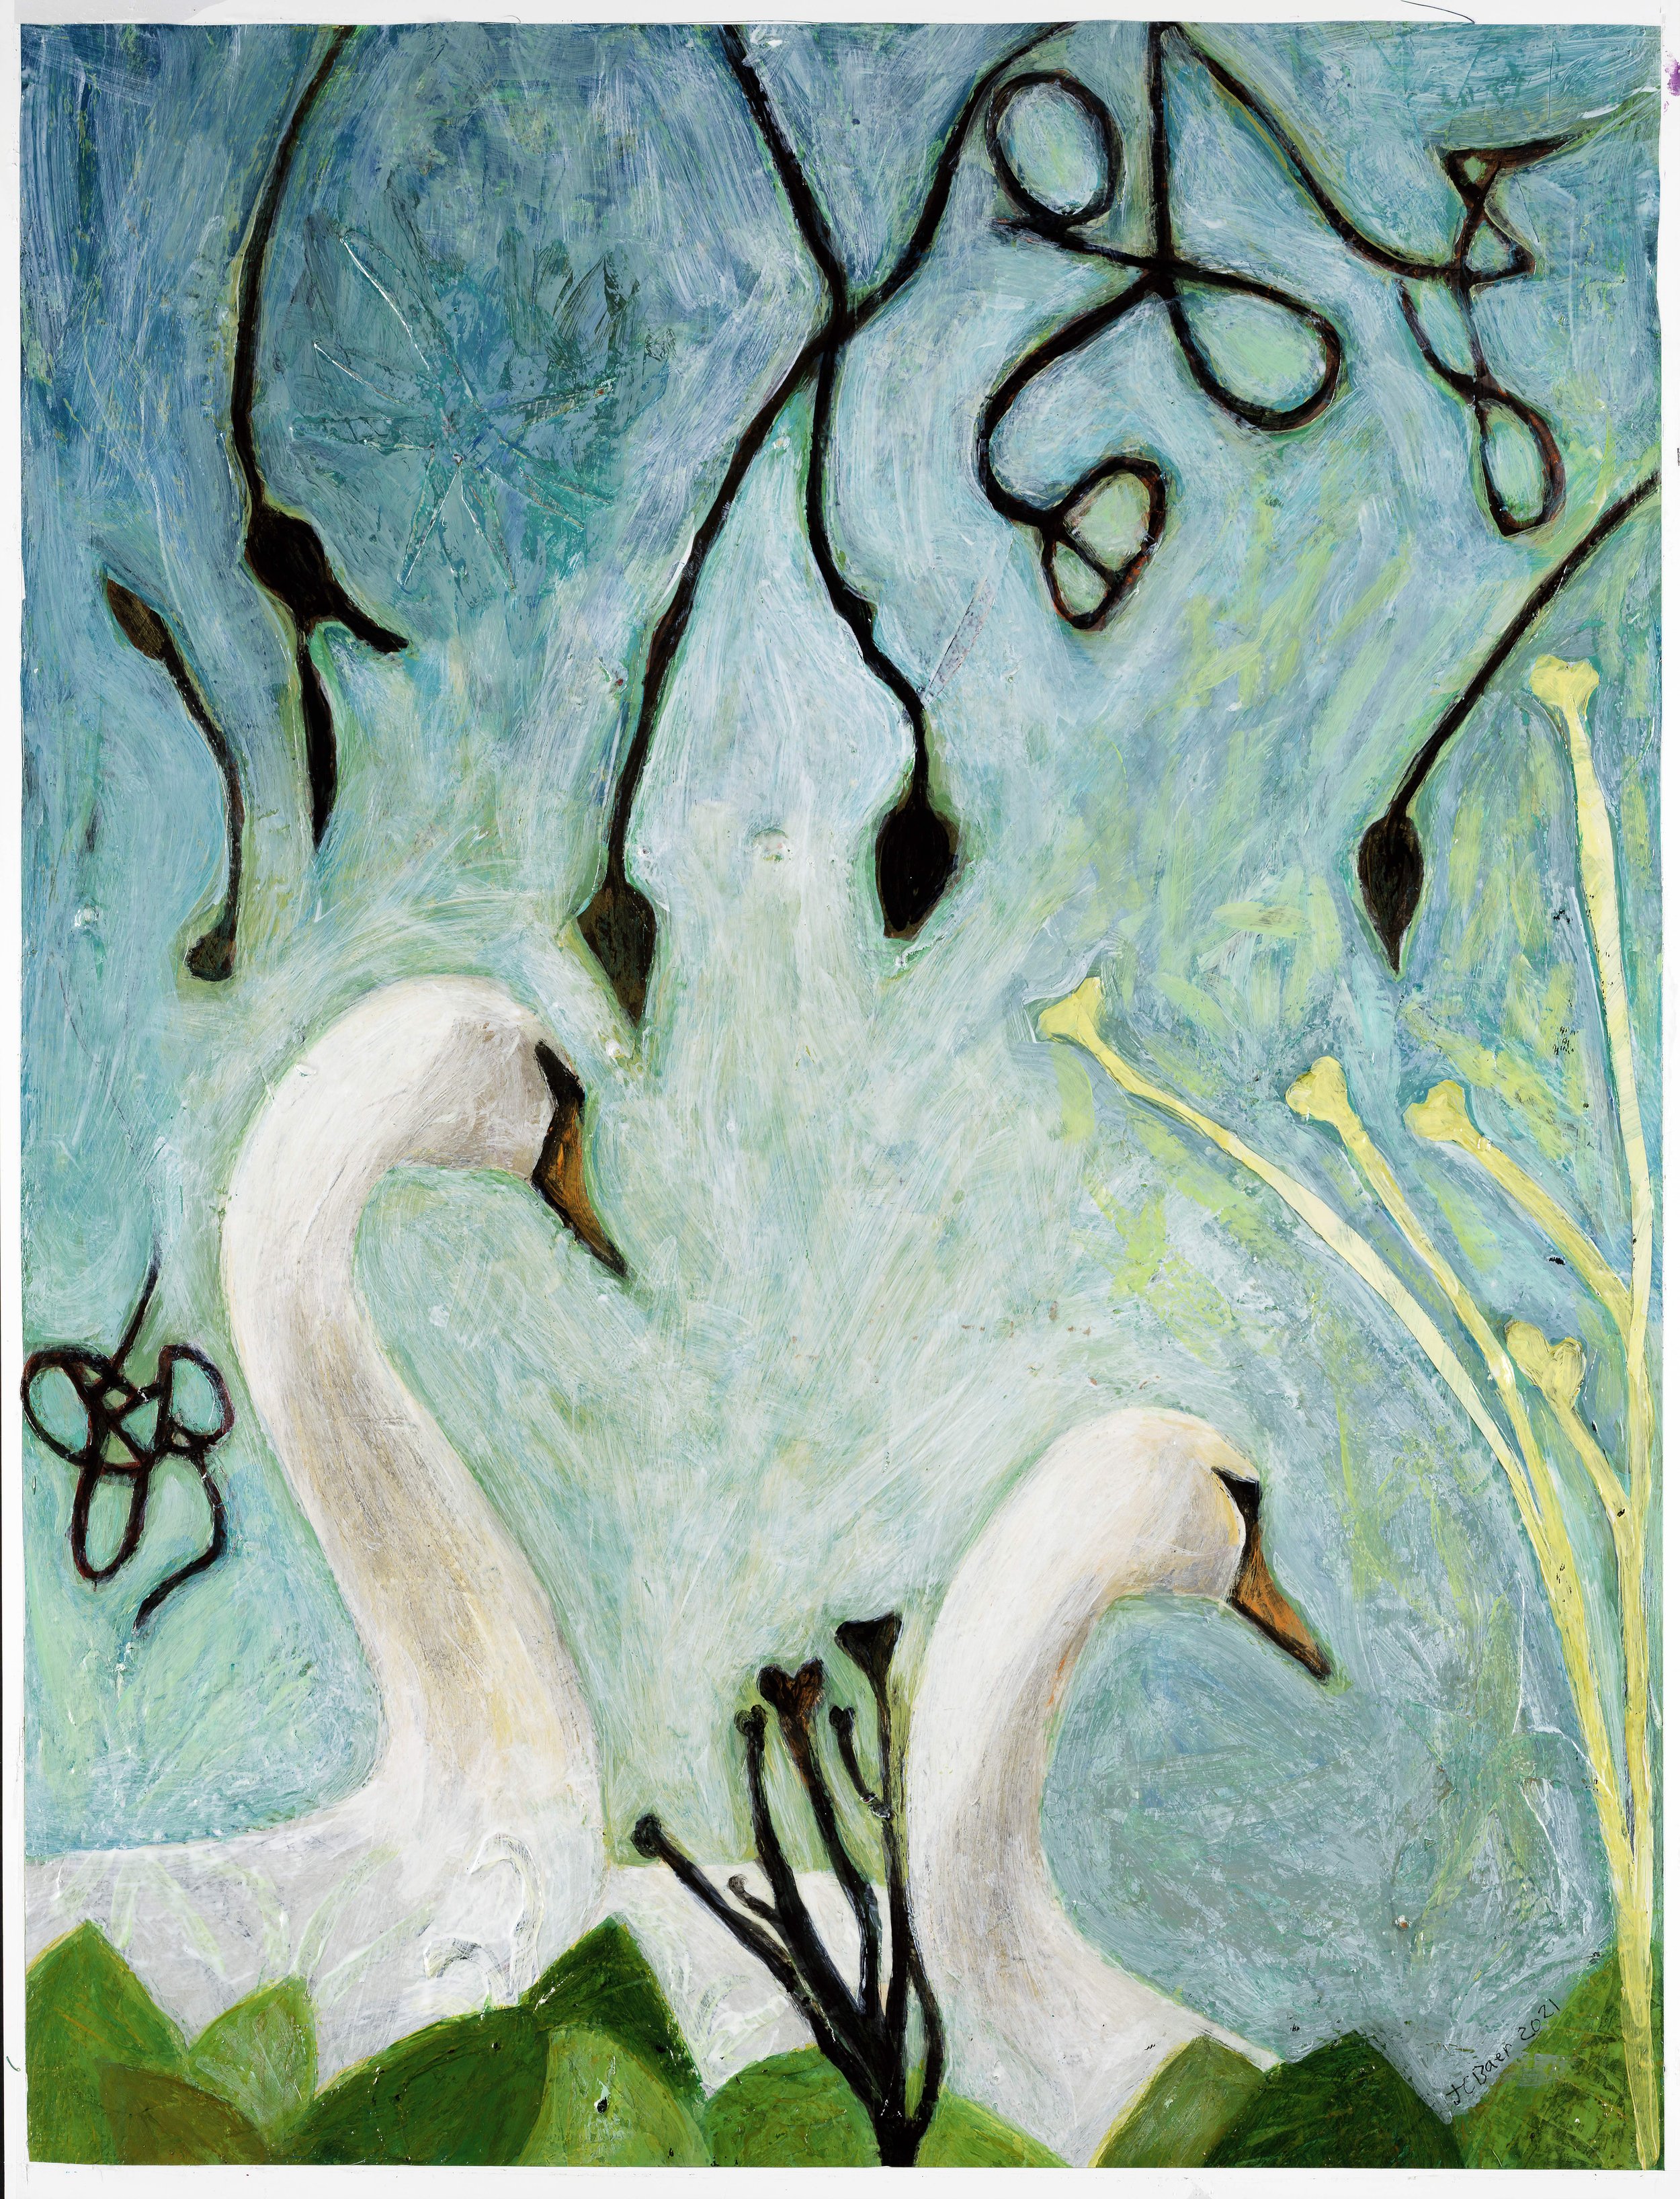 Swan, 2021, acrylic and collage on paper, 26 x 19", SOLD